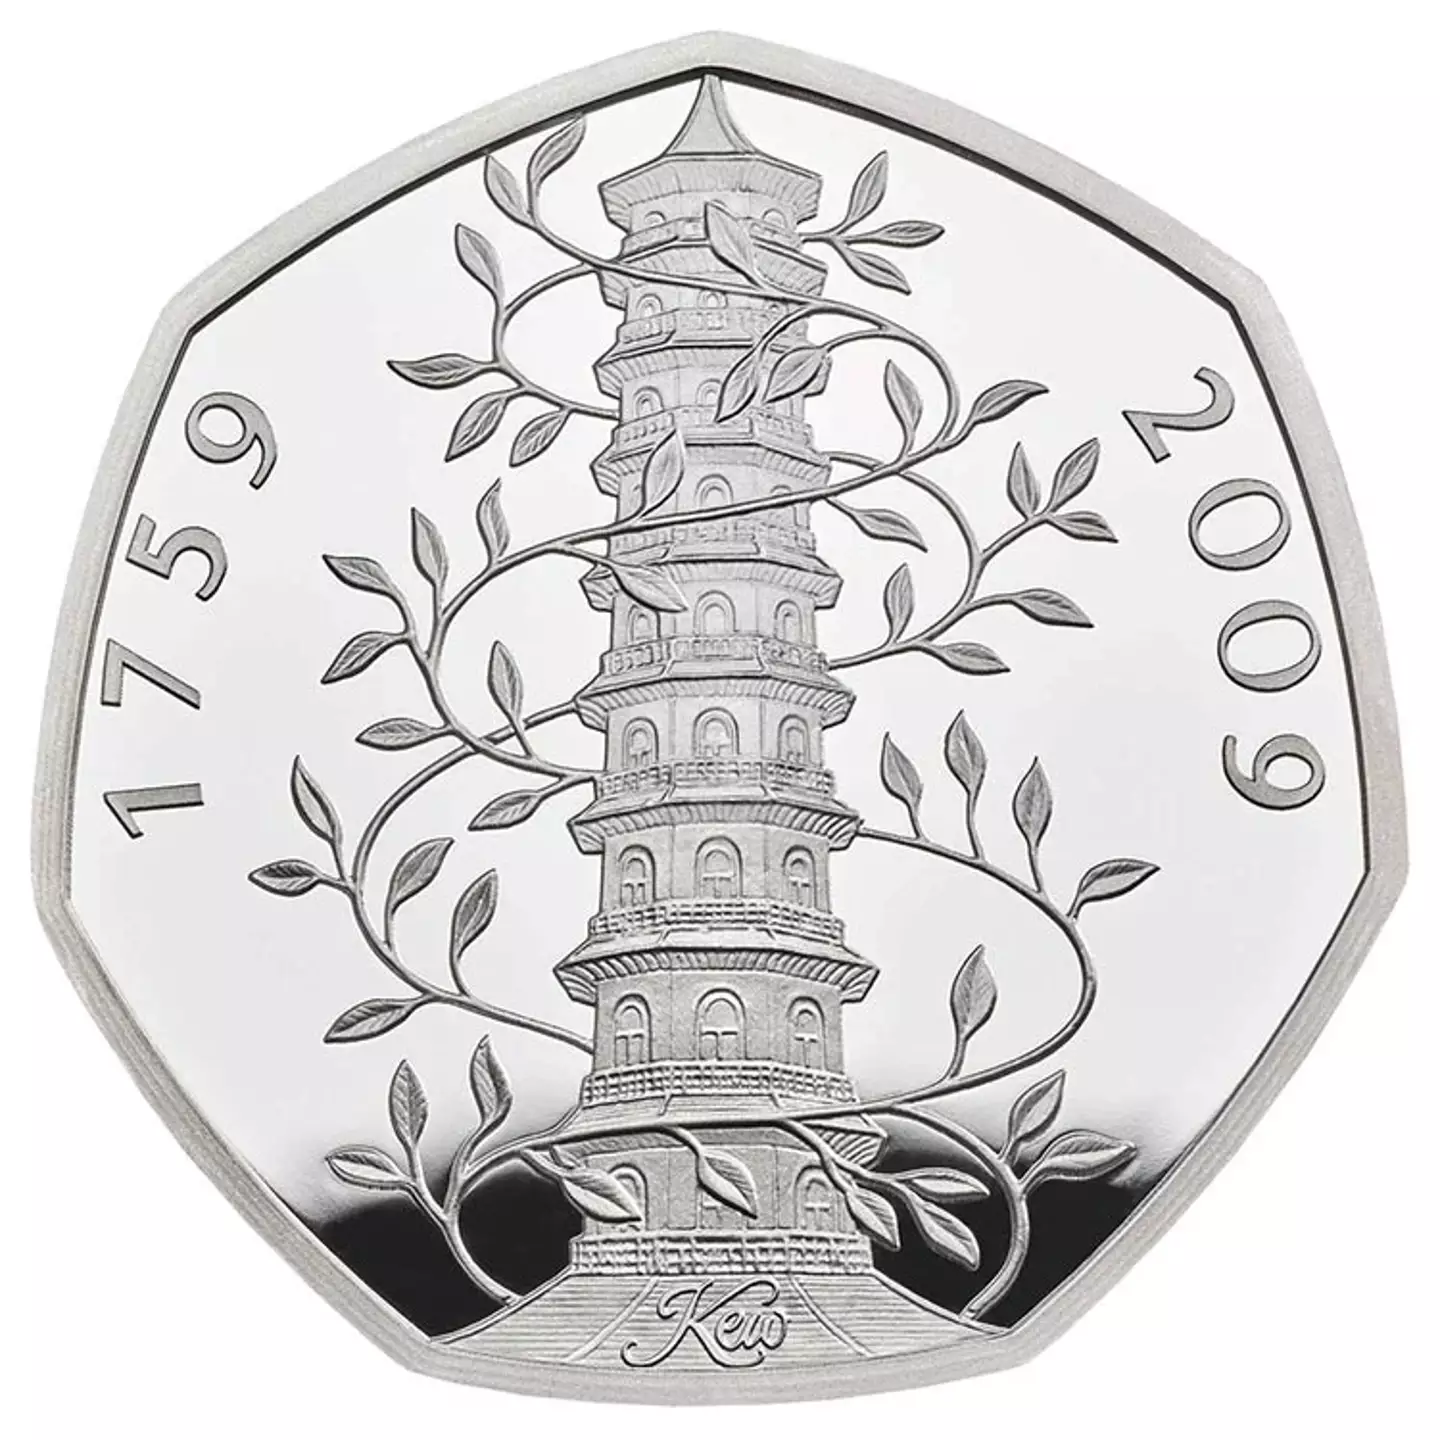 The Kew Gardens 50p is considered to be one of the rarest coins currently in circulation.